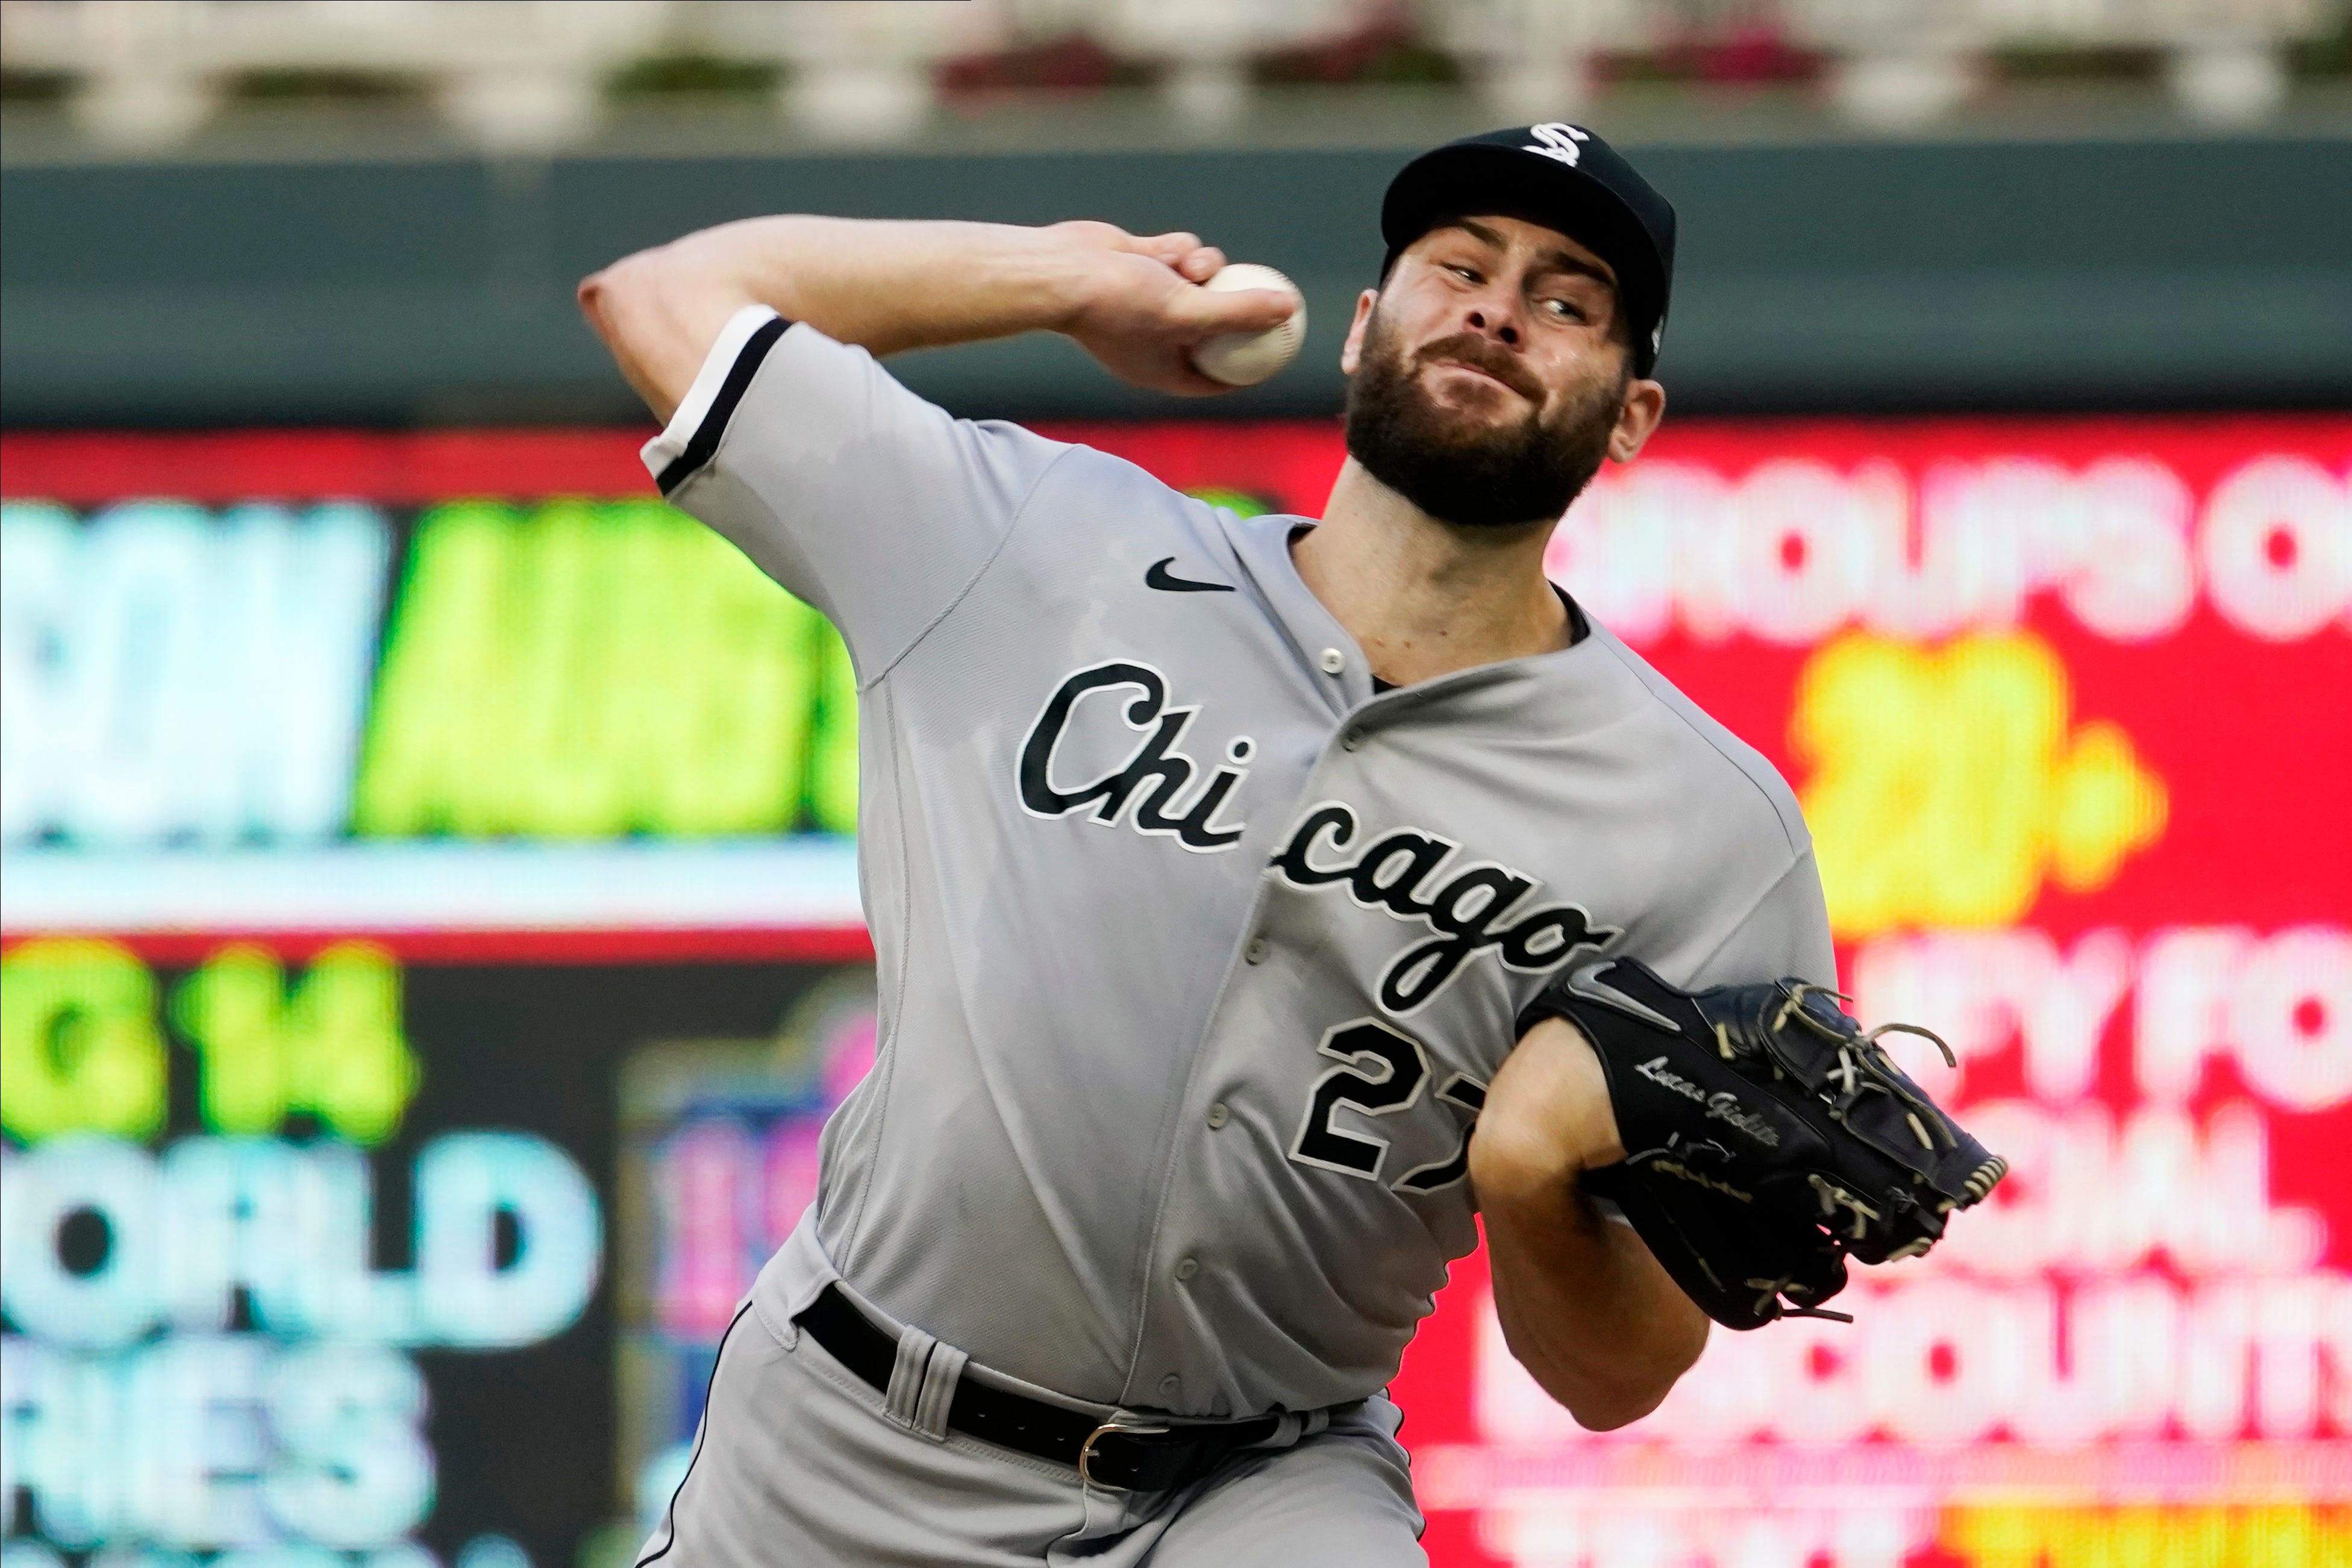 MLB at Field of Dreams: Lucas Giolito pitches to 'Shoeless' Joe